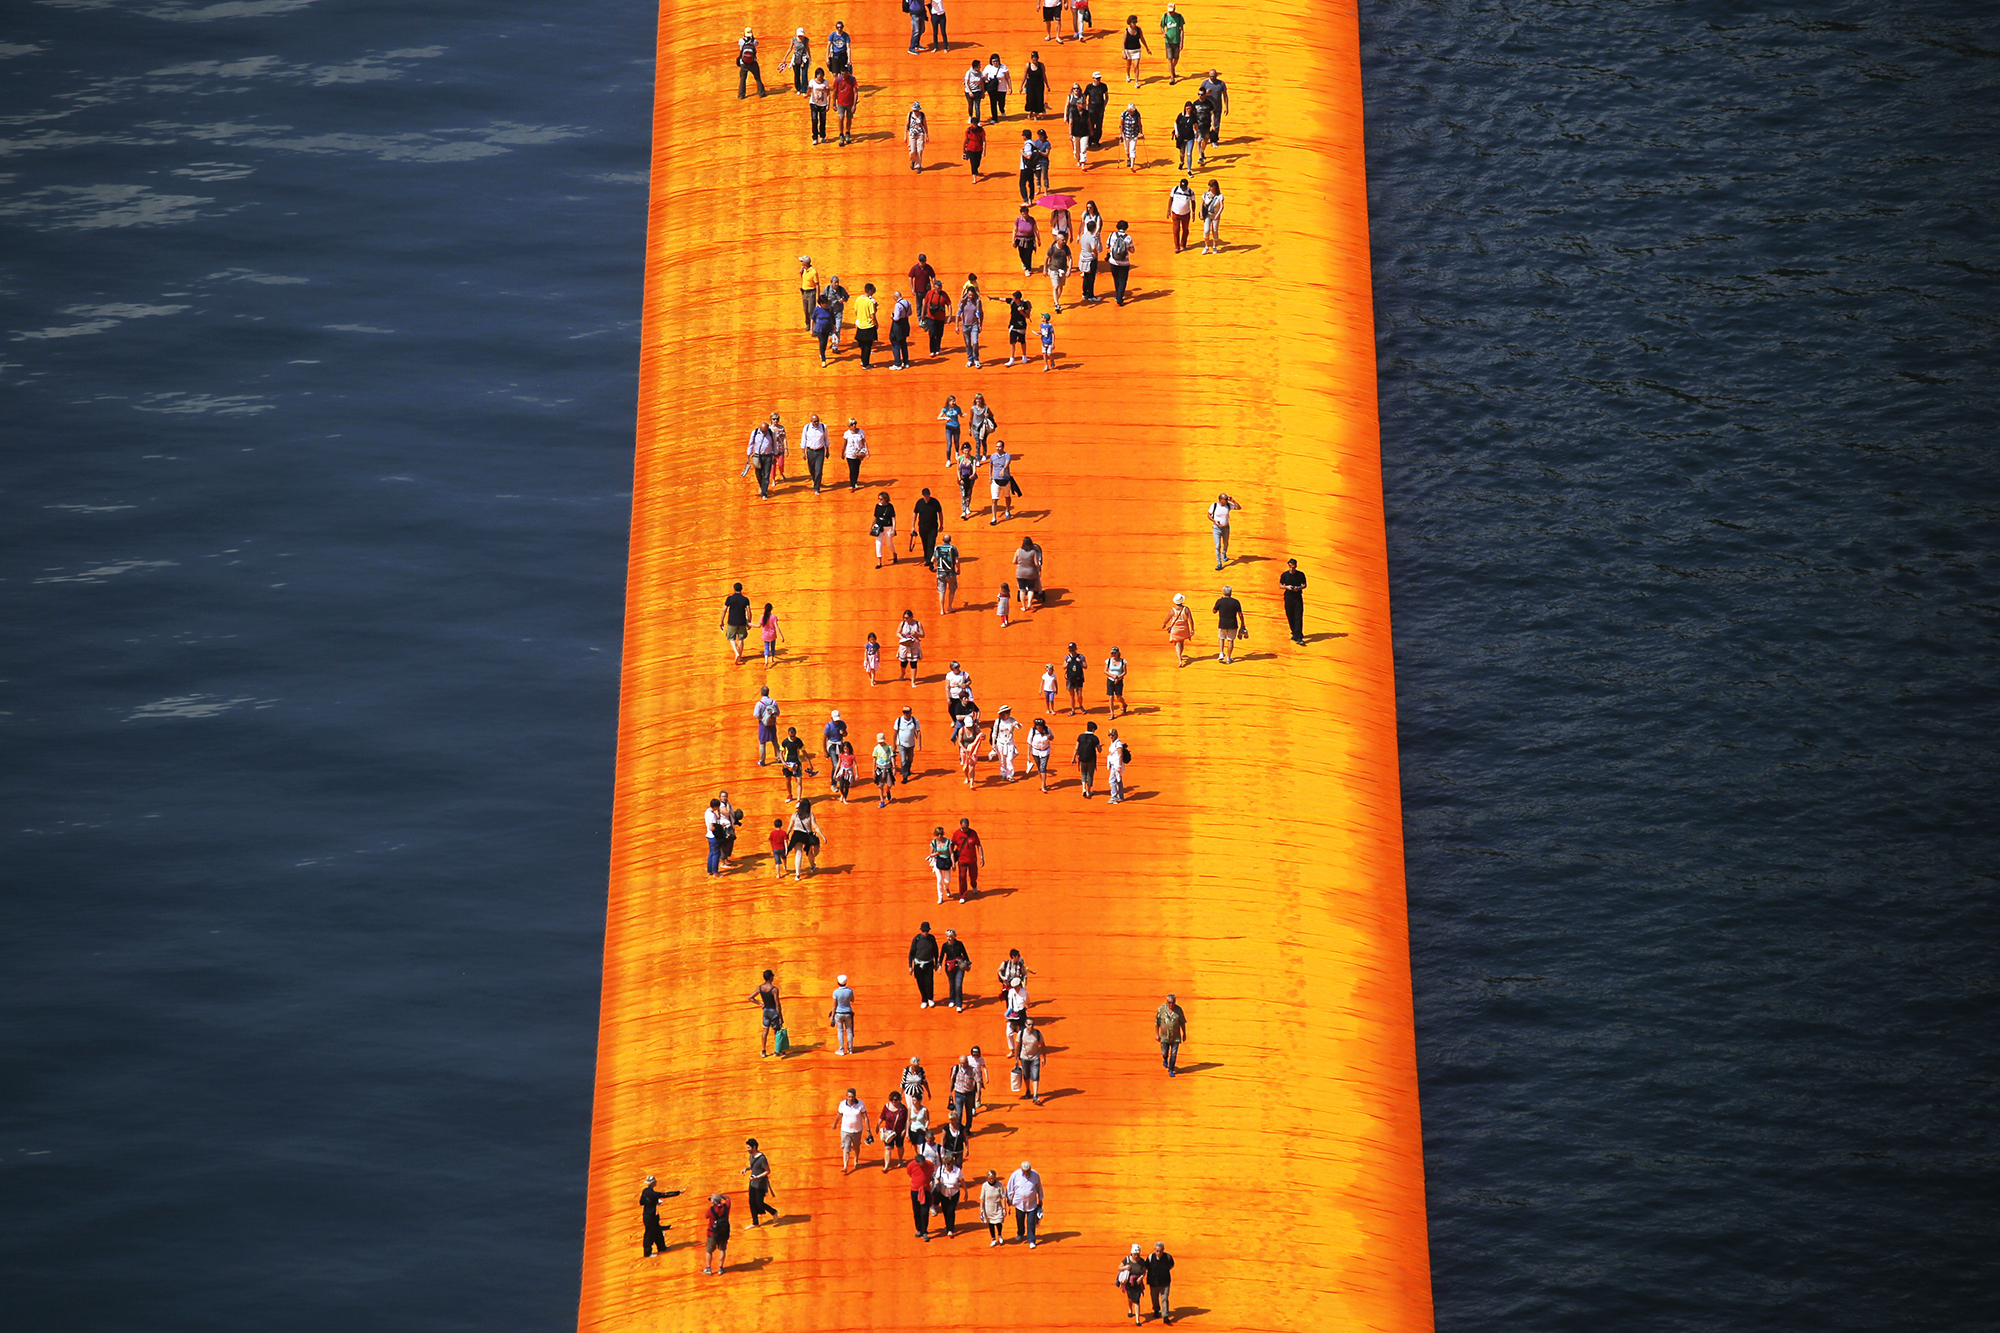 'The Floating Piers' Installation by Bulgarian artist Christo in Iseo, Italy, on June 8, 2016.